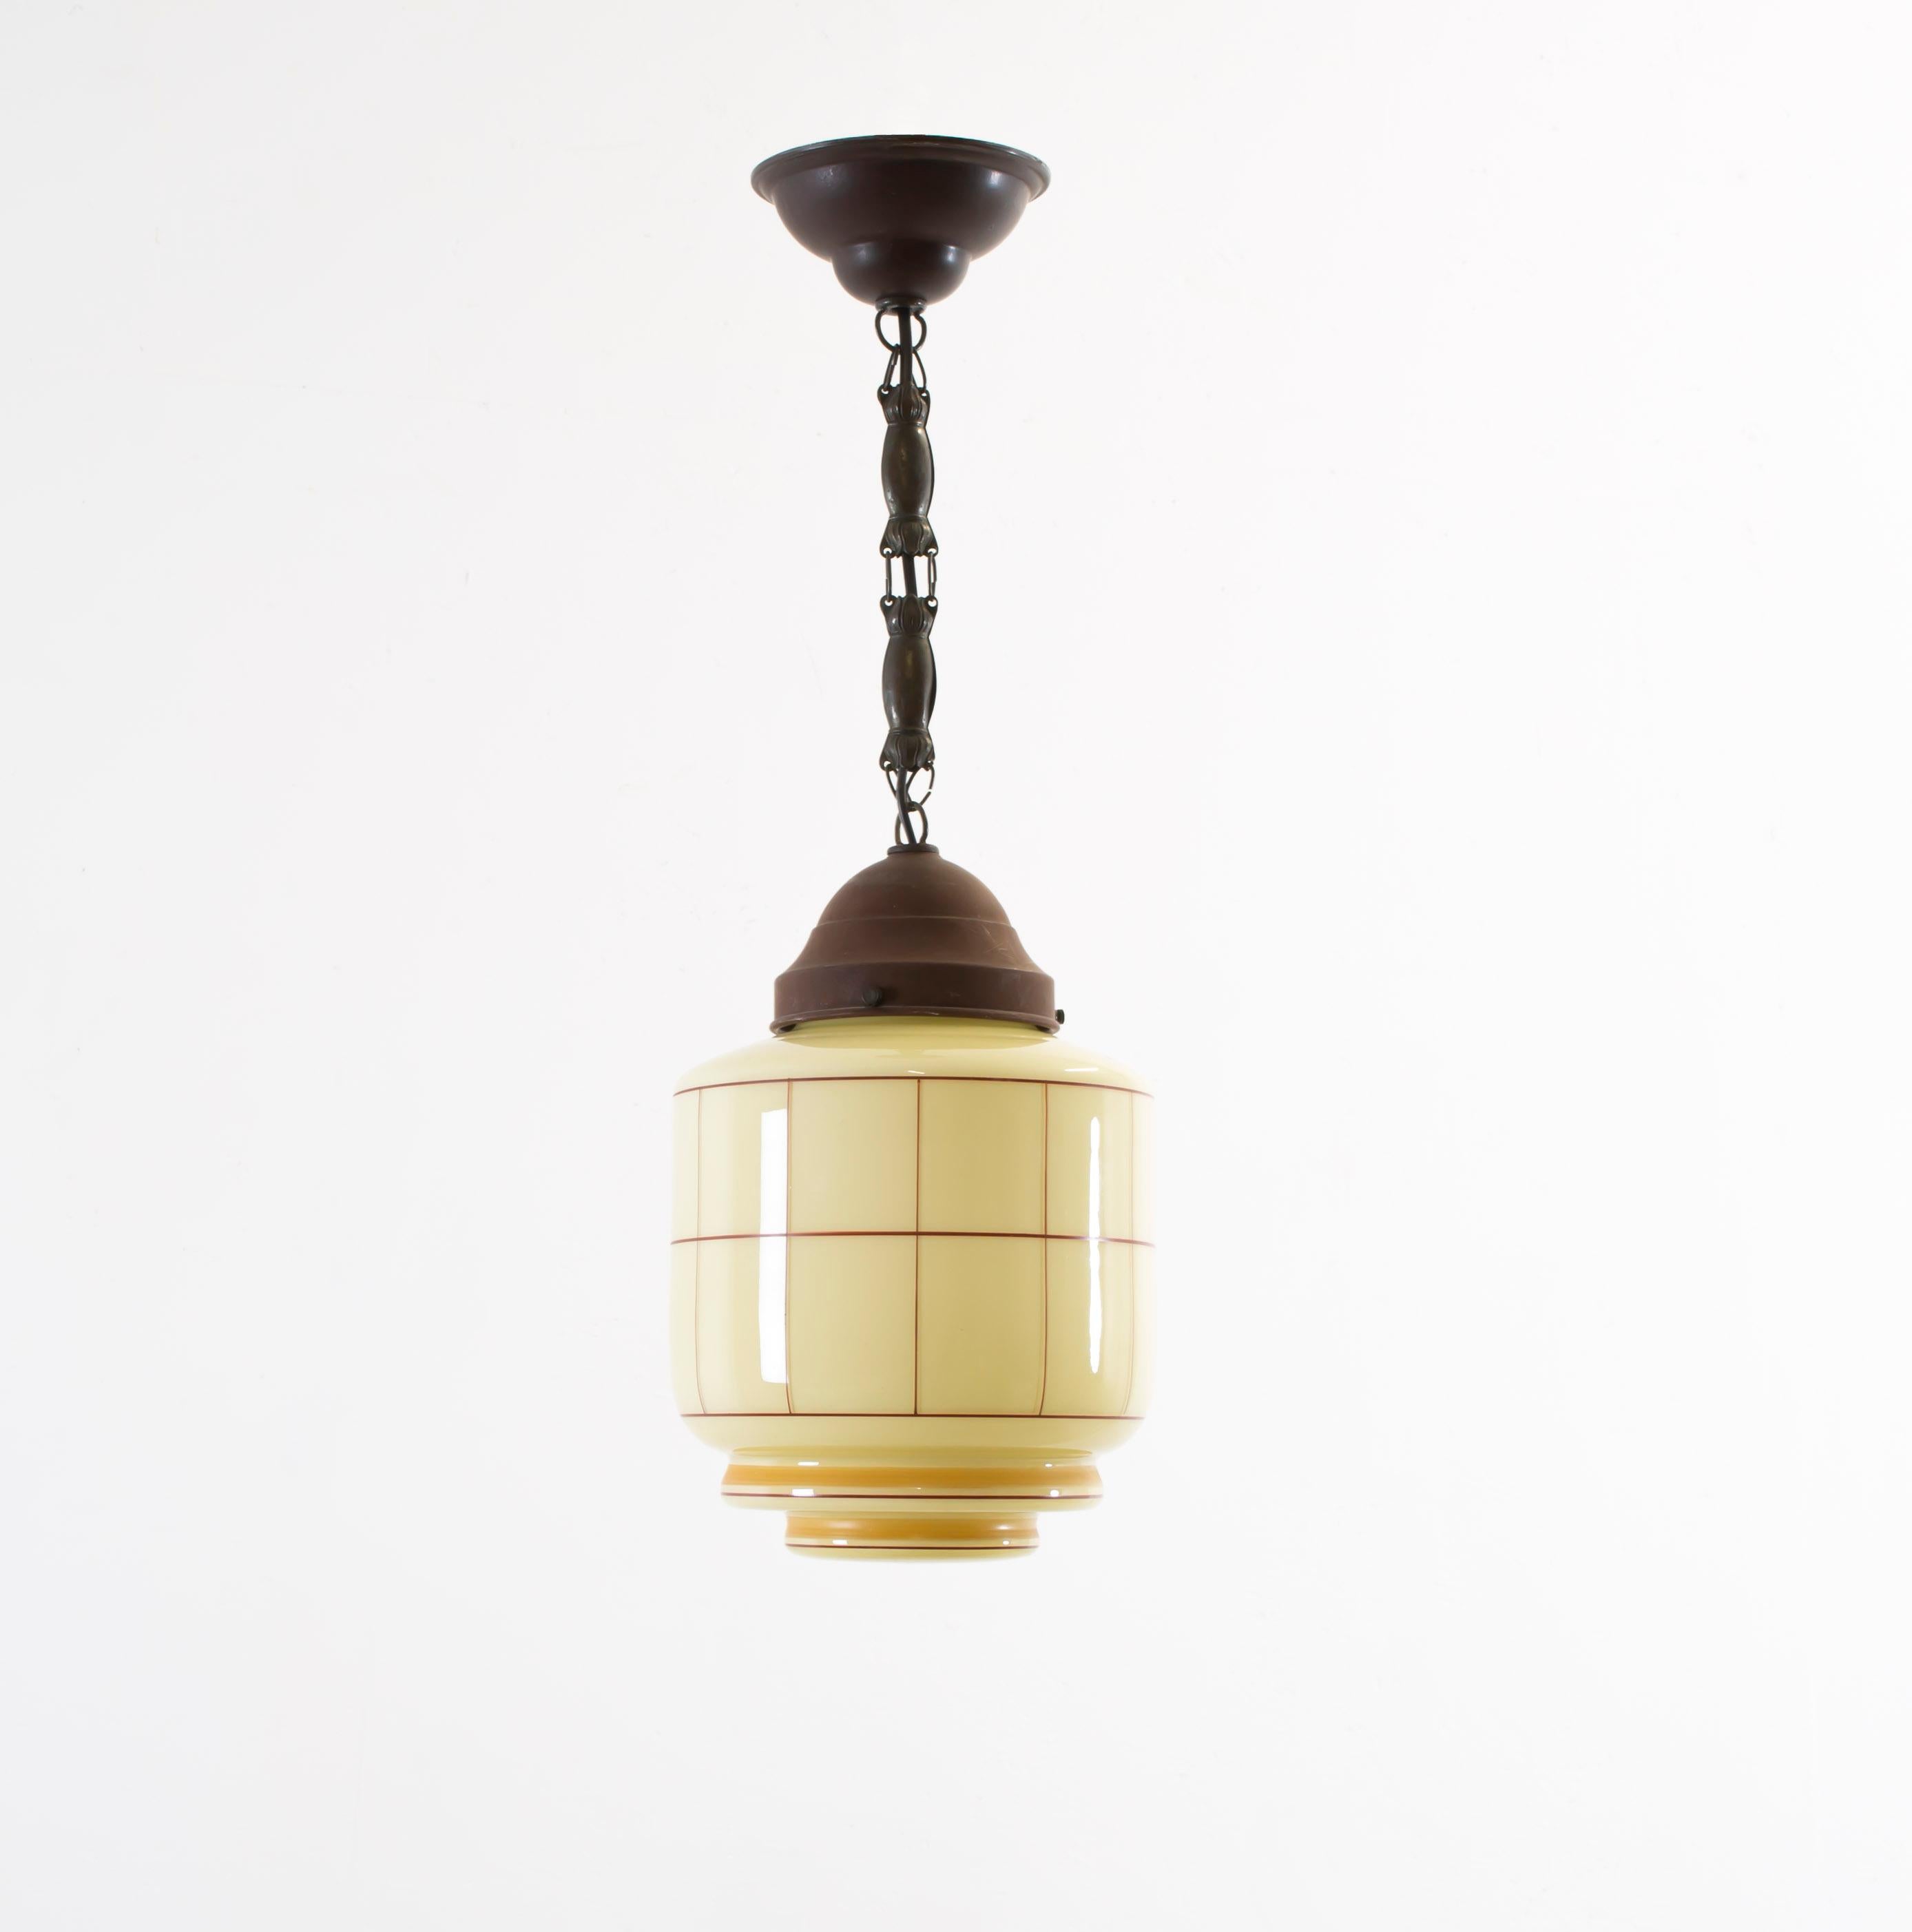 Wonderful Art Deco ceiling light with shade in decorated glass, steel stem and bakelite cup. Most likely designed and made in Norway by Høvik Verk from circa 1930s first half. The lamp is fully working and in good vintage condition. MAX 60W, E27